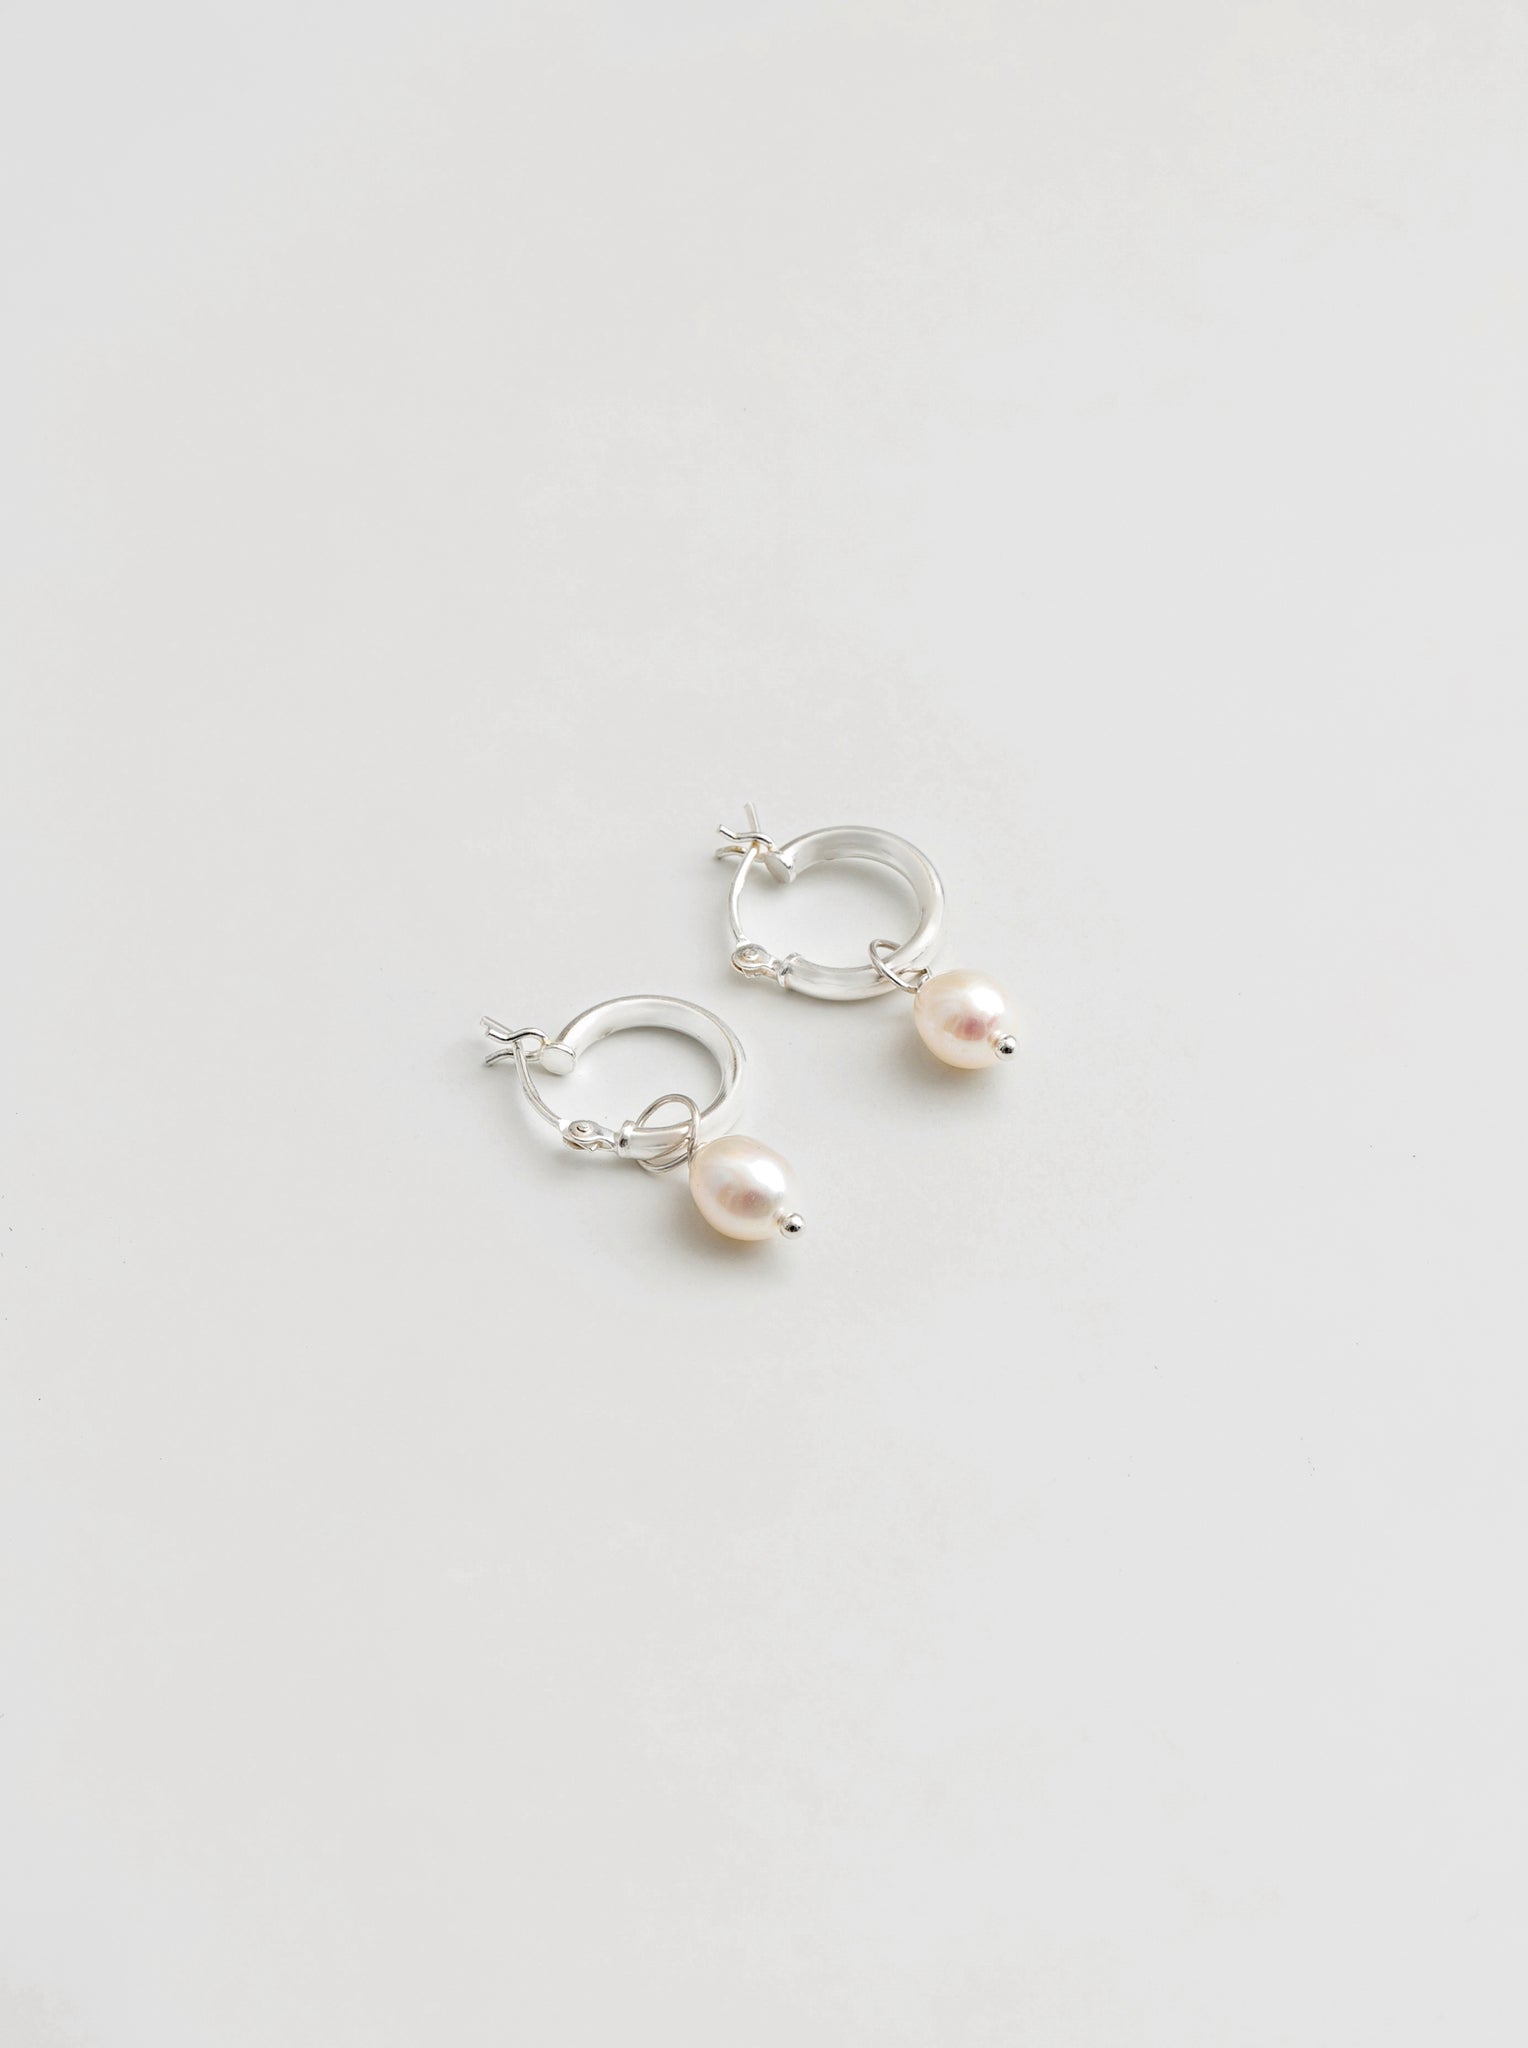 Wolf Circus Small Pearl Hoop Earrings in Sterling Silver | Removable Pearl-Earrings-wolfcircus.com